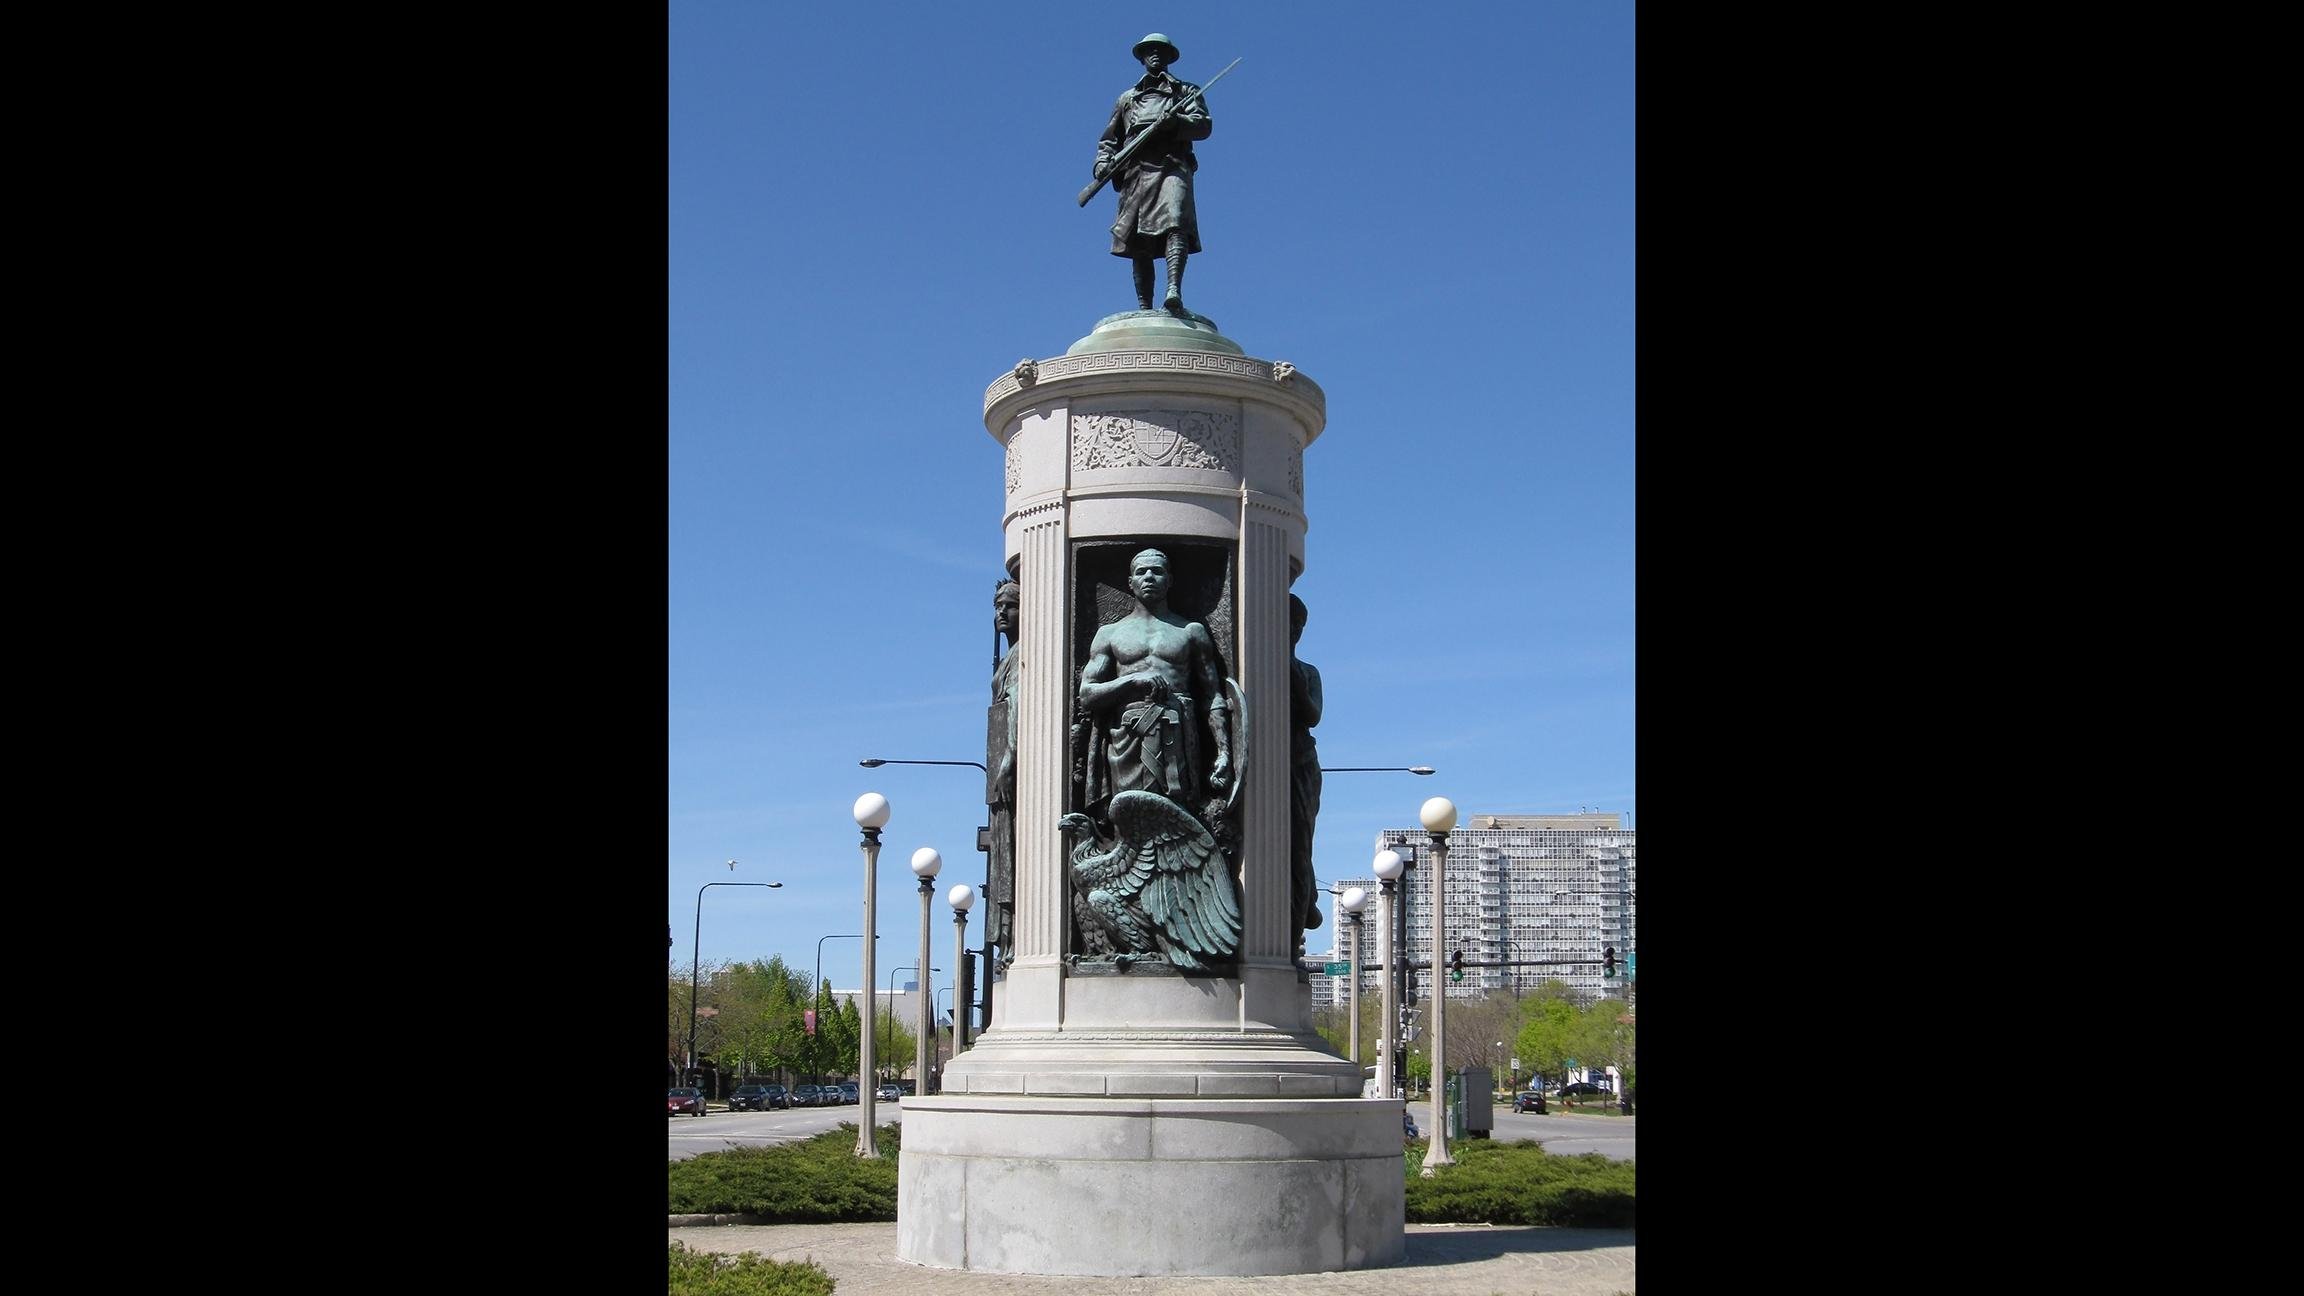 The Victory Monument has stood at the corner of 35th and King Drive in Bronzeville since 1927. (Joe Ravi / Wikimedia Commons)